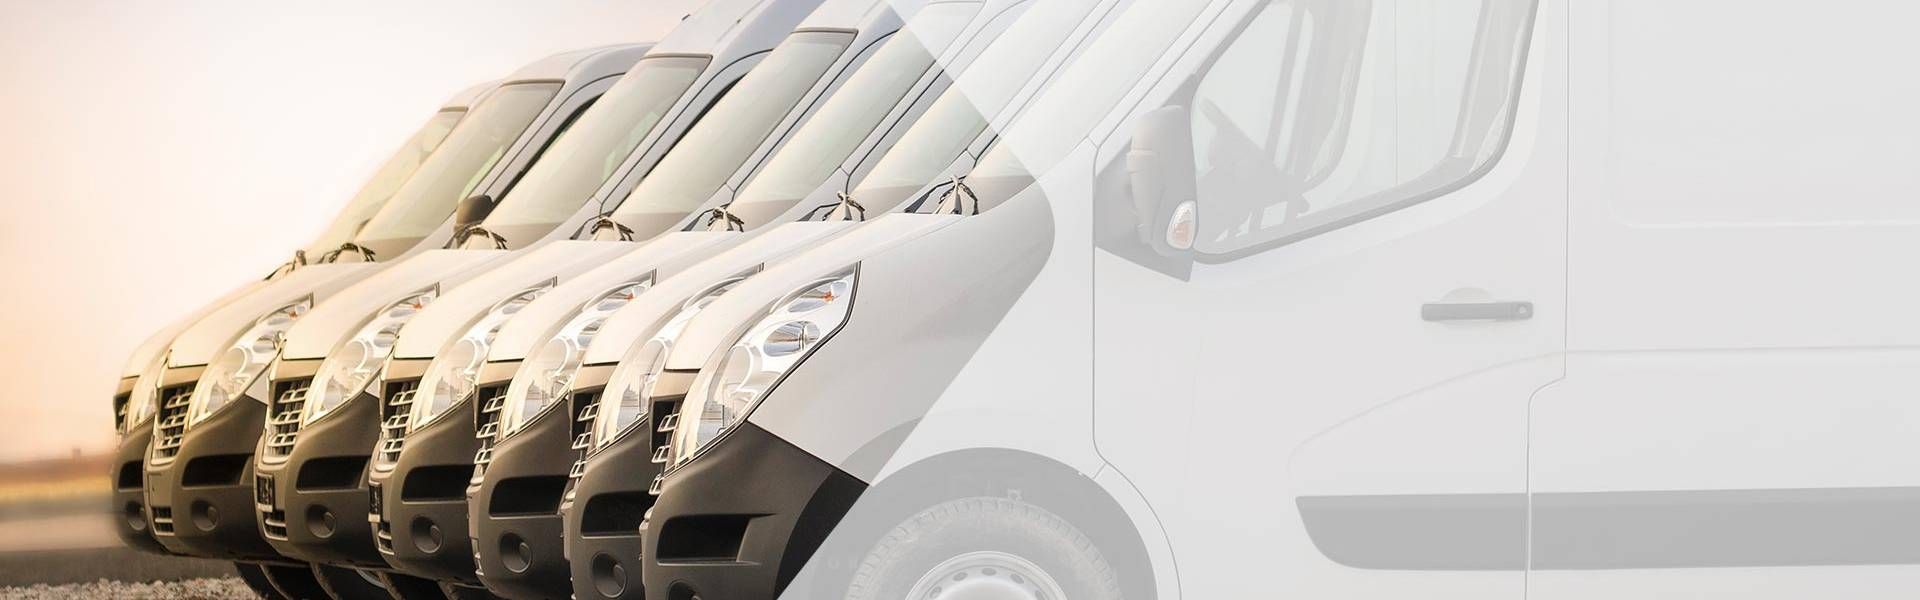 Solutions for fleet managers